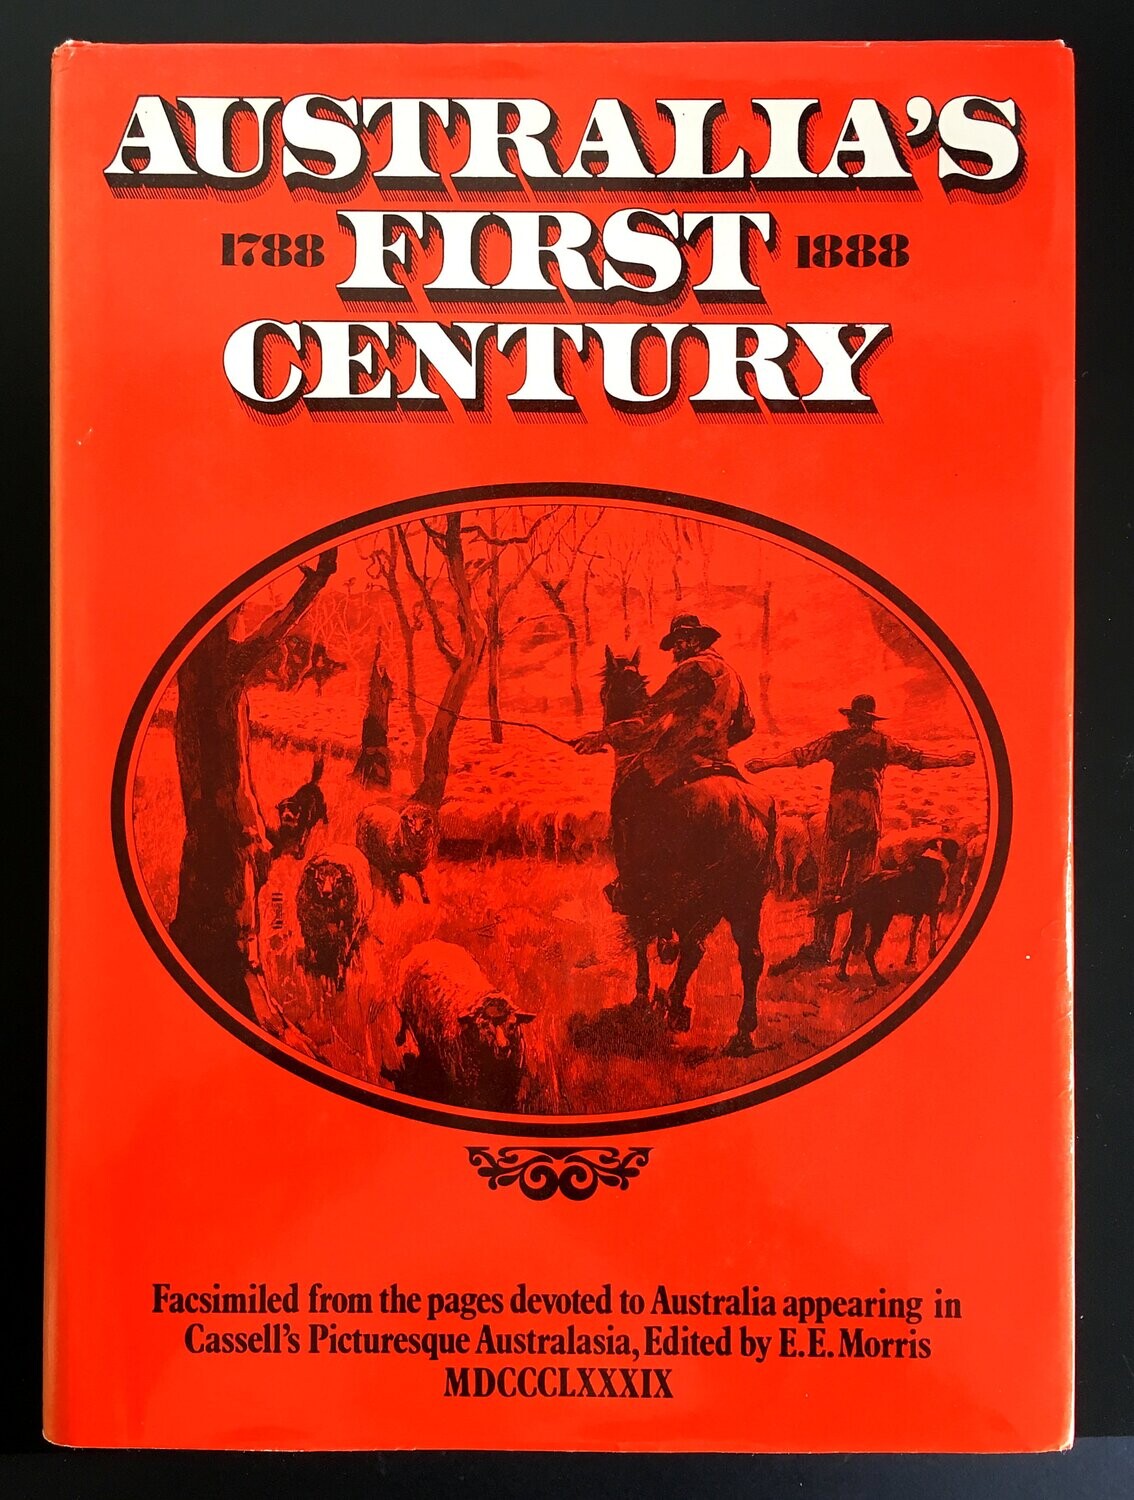 Australia's First Century: 1788 - 1888: Facsimiled From the Pages Devoted to Australia Appearing in Cassell's Picturesque Australasia edited by E E Morris